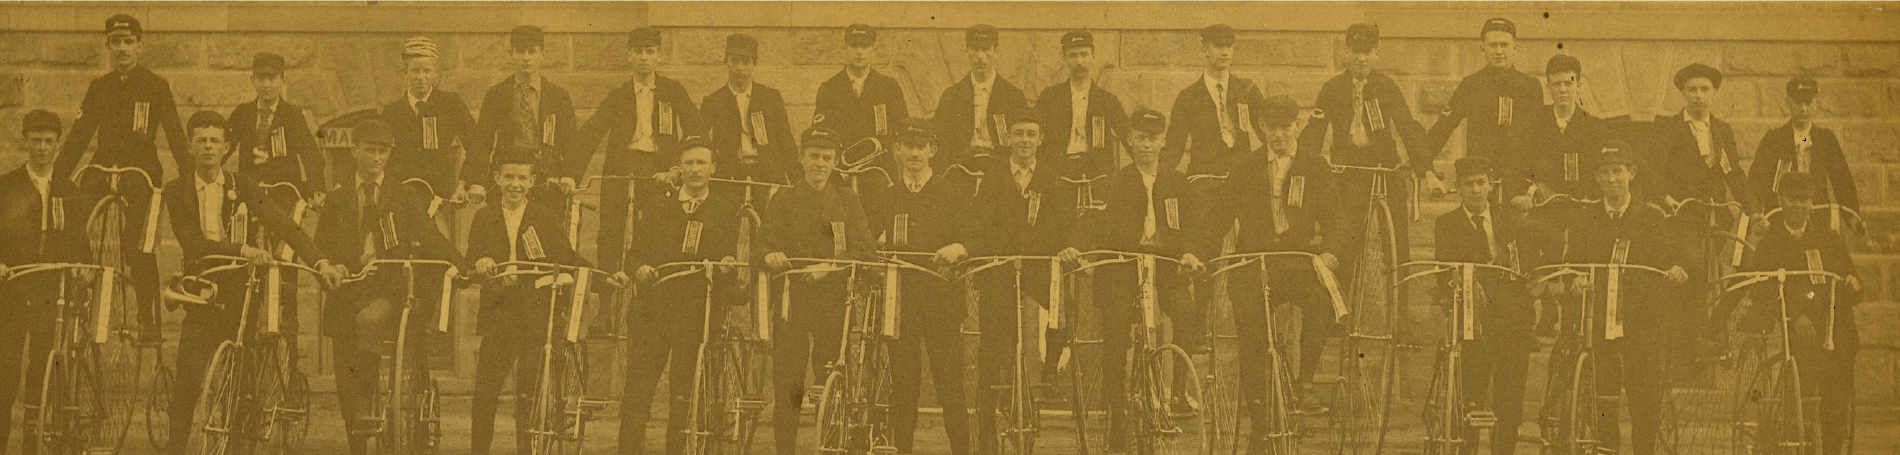 Old photo of two rows of men standing next to bikes.